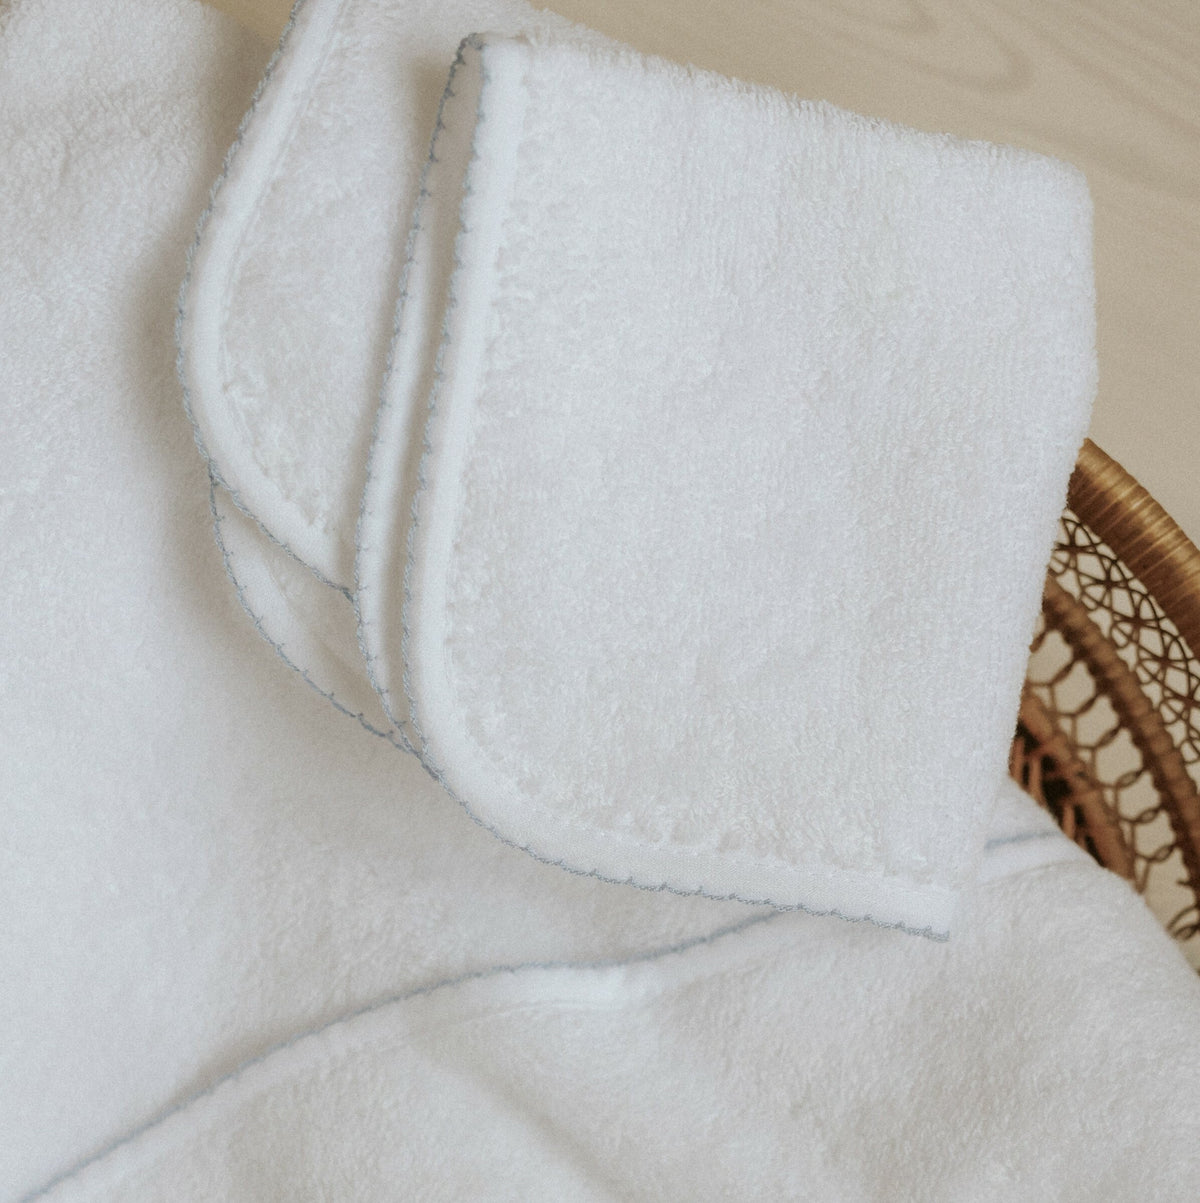 Classic washcloth in white with blue trim detail. Folded on top of bath towel